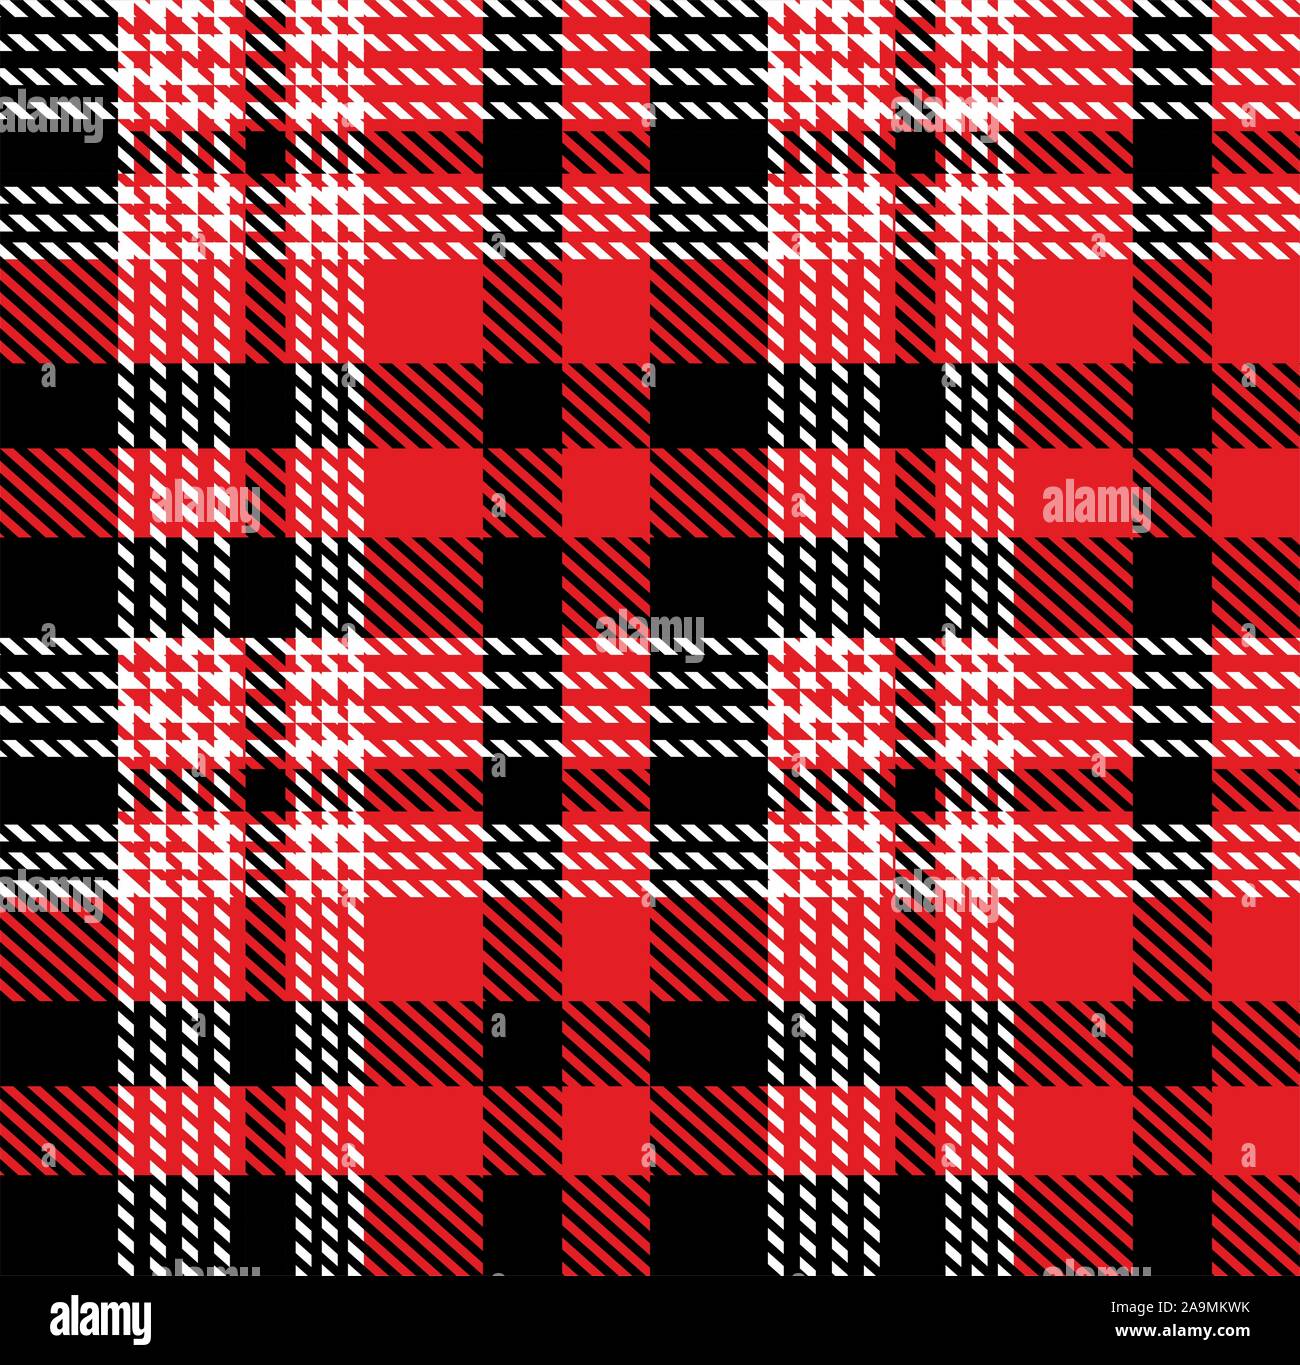 Coral Pink, Black and White Girly Plaid Fabric